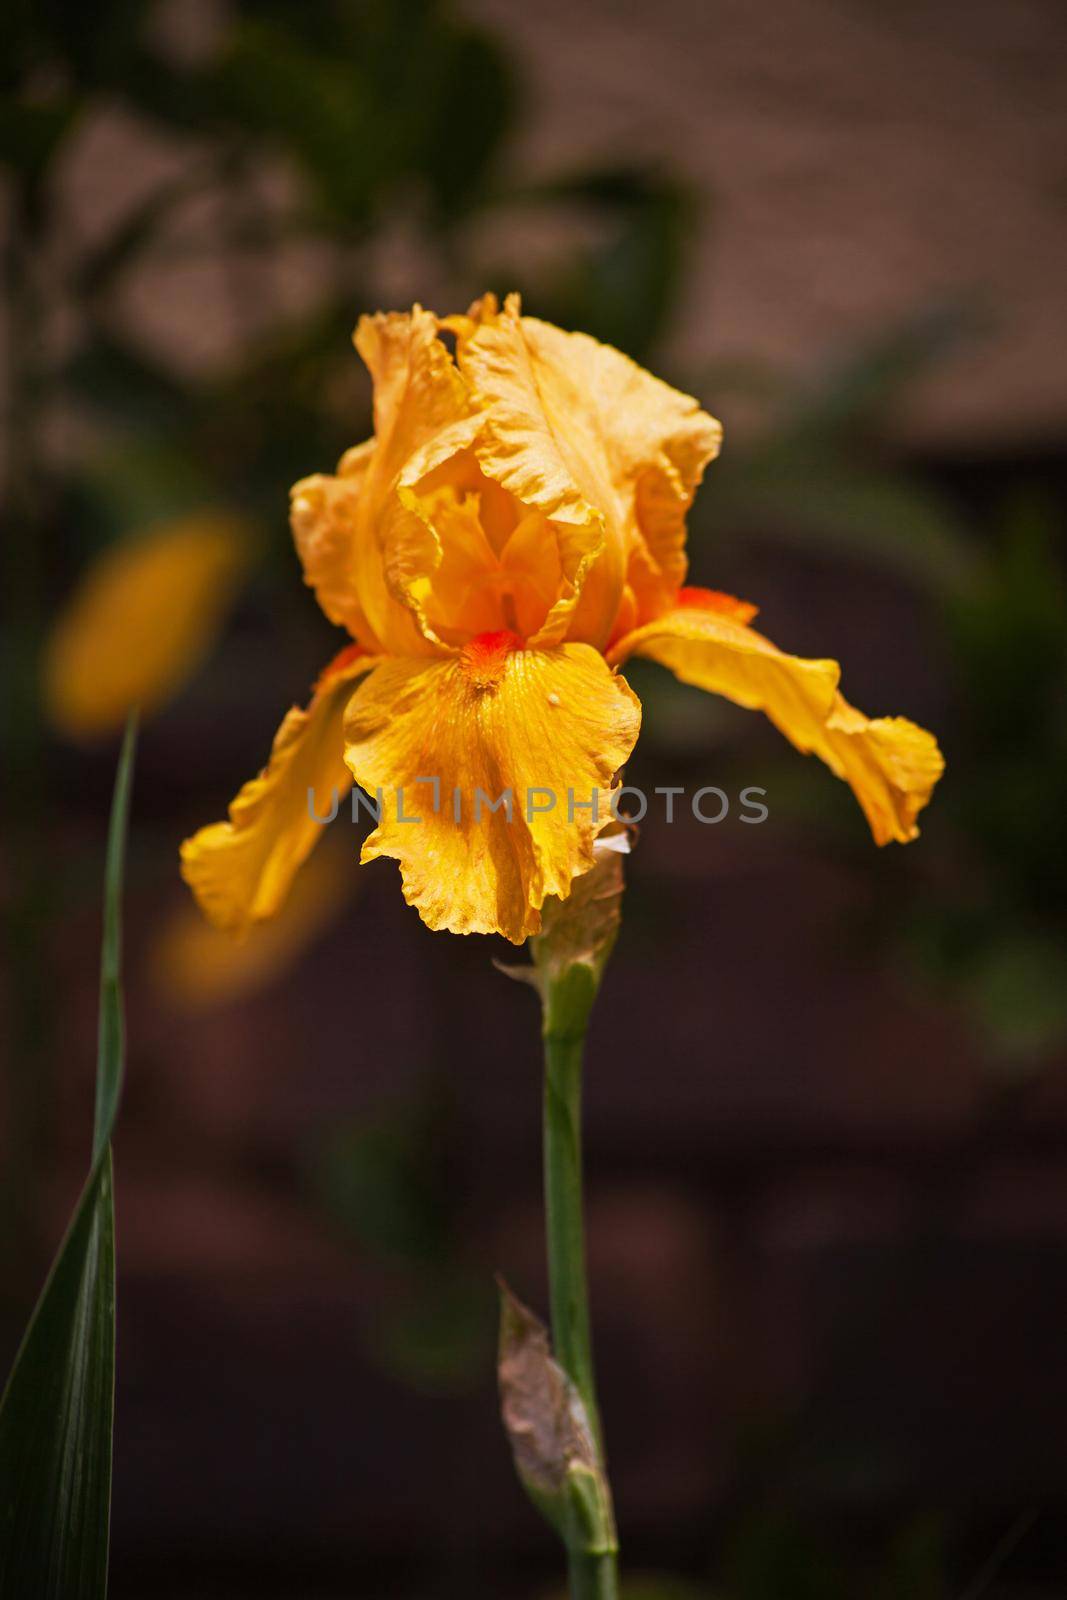 A single bright yellow Bearded Iris flower on a blurred background